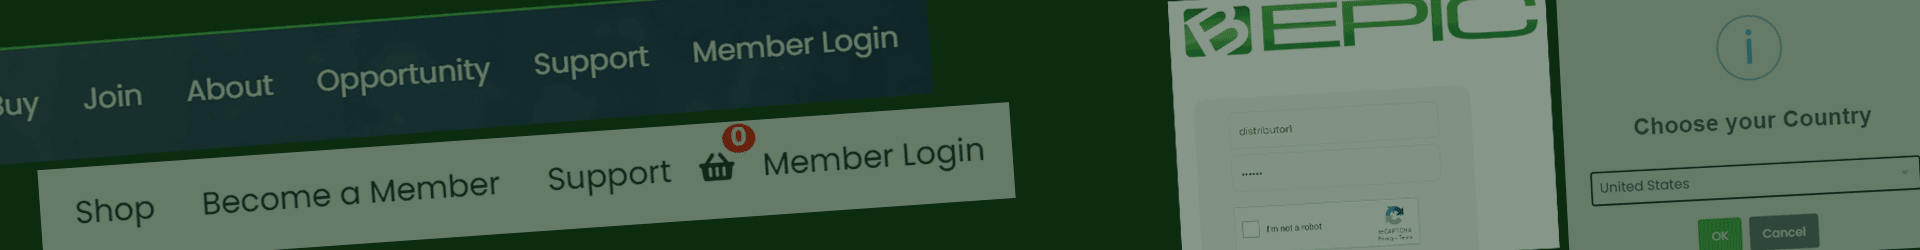 bepic backoffice - how to login